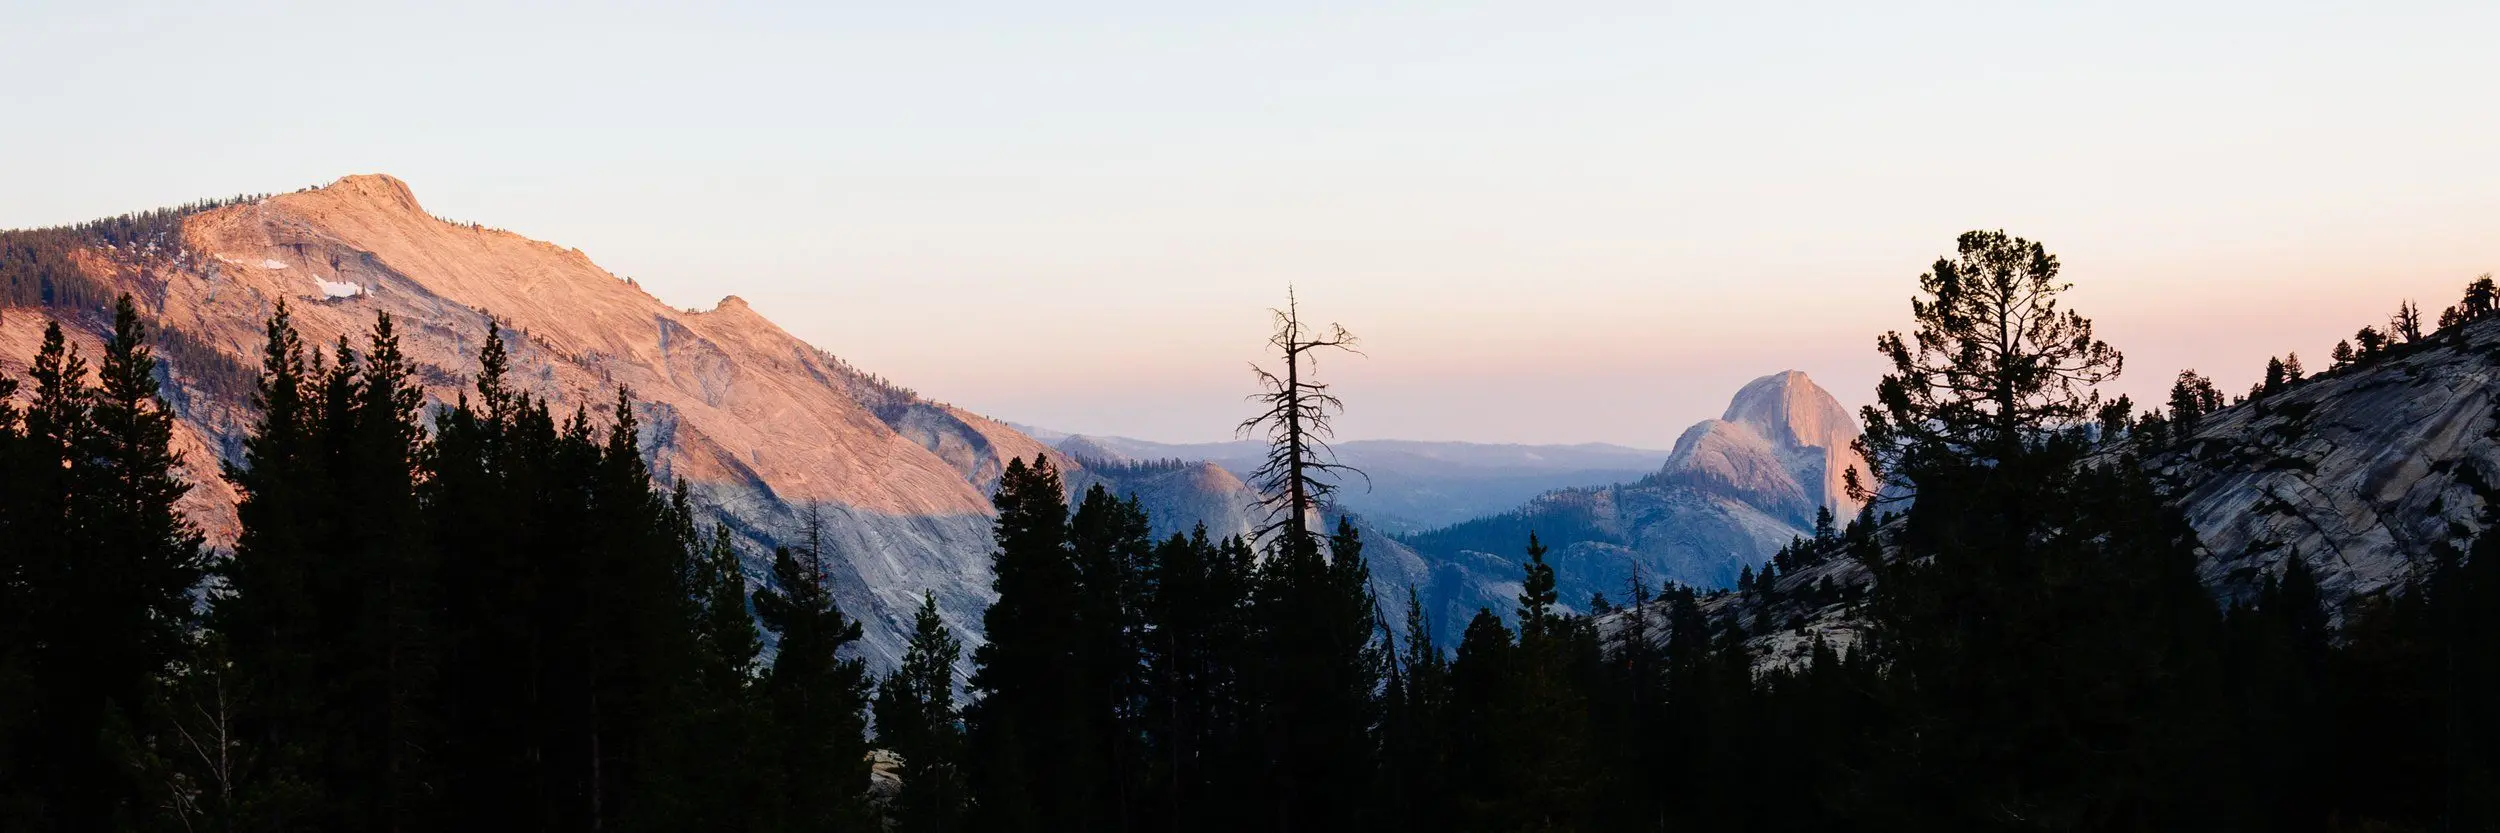 Wide shot at sunset including Half Dome in the distance with dark trees in the foreground.